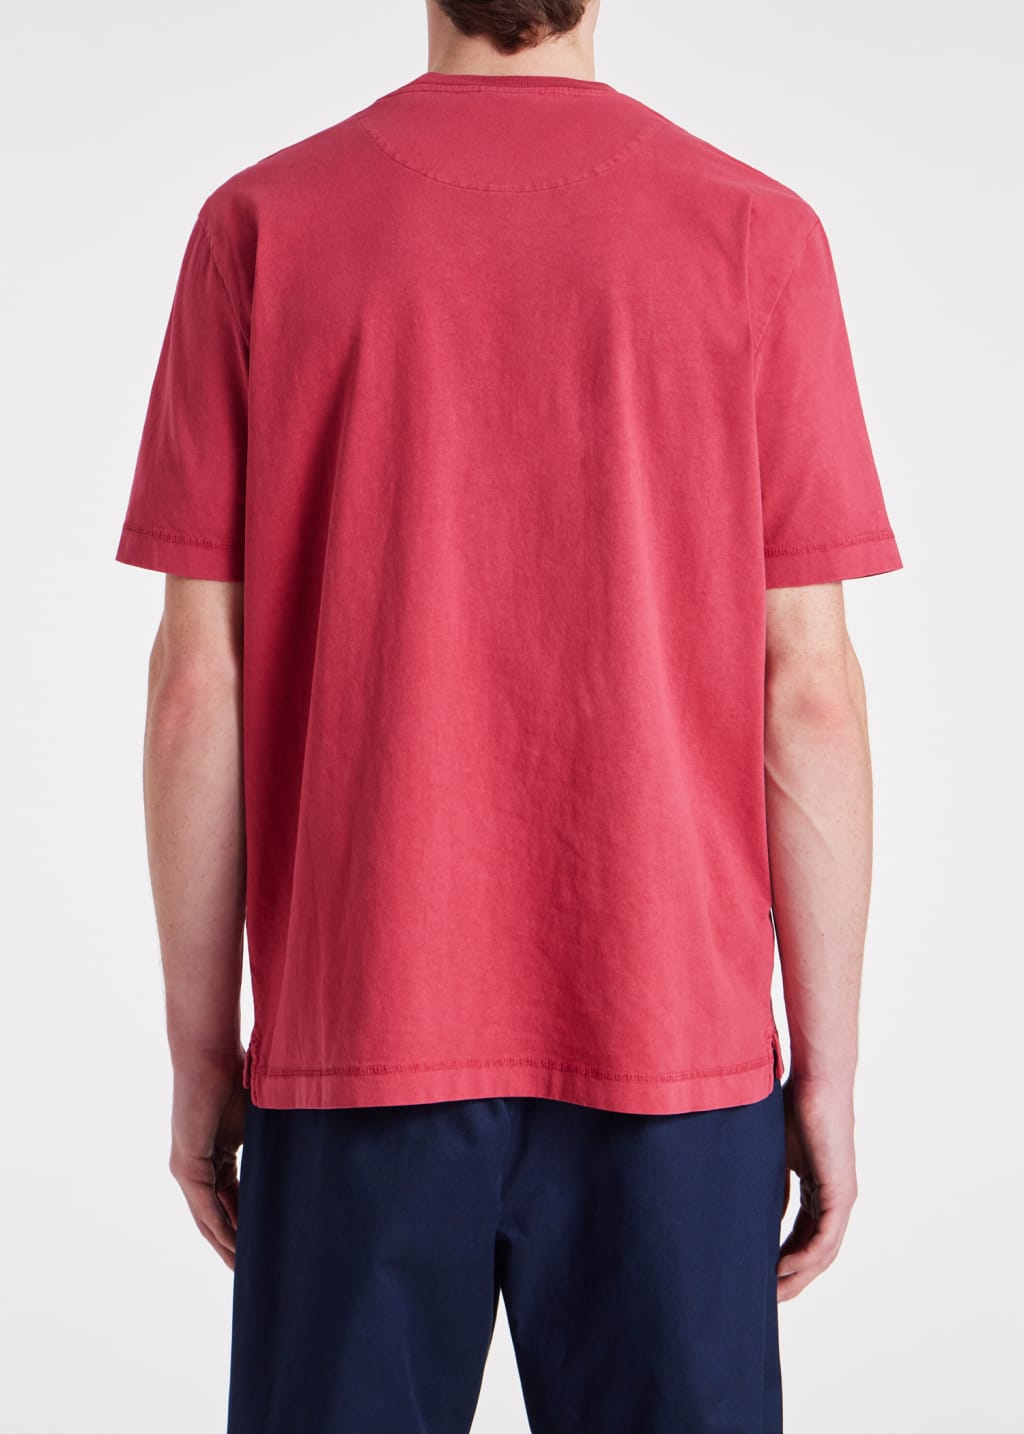 Model View - Washed Red Cotton 'Happy' T-Shirt Paul Smith